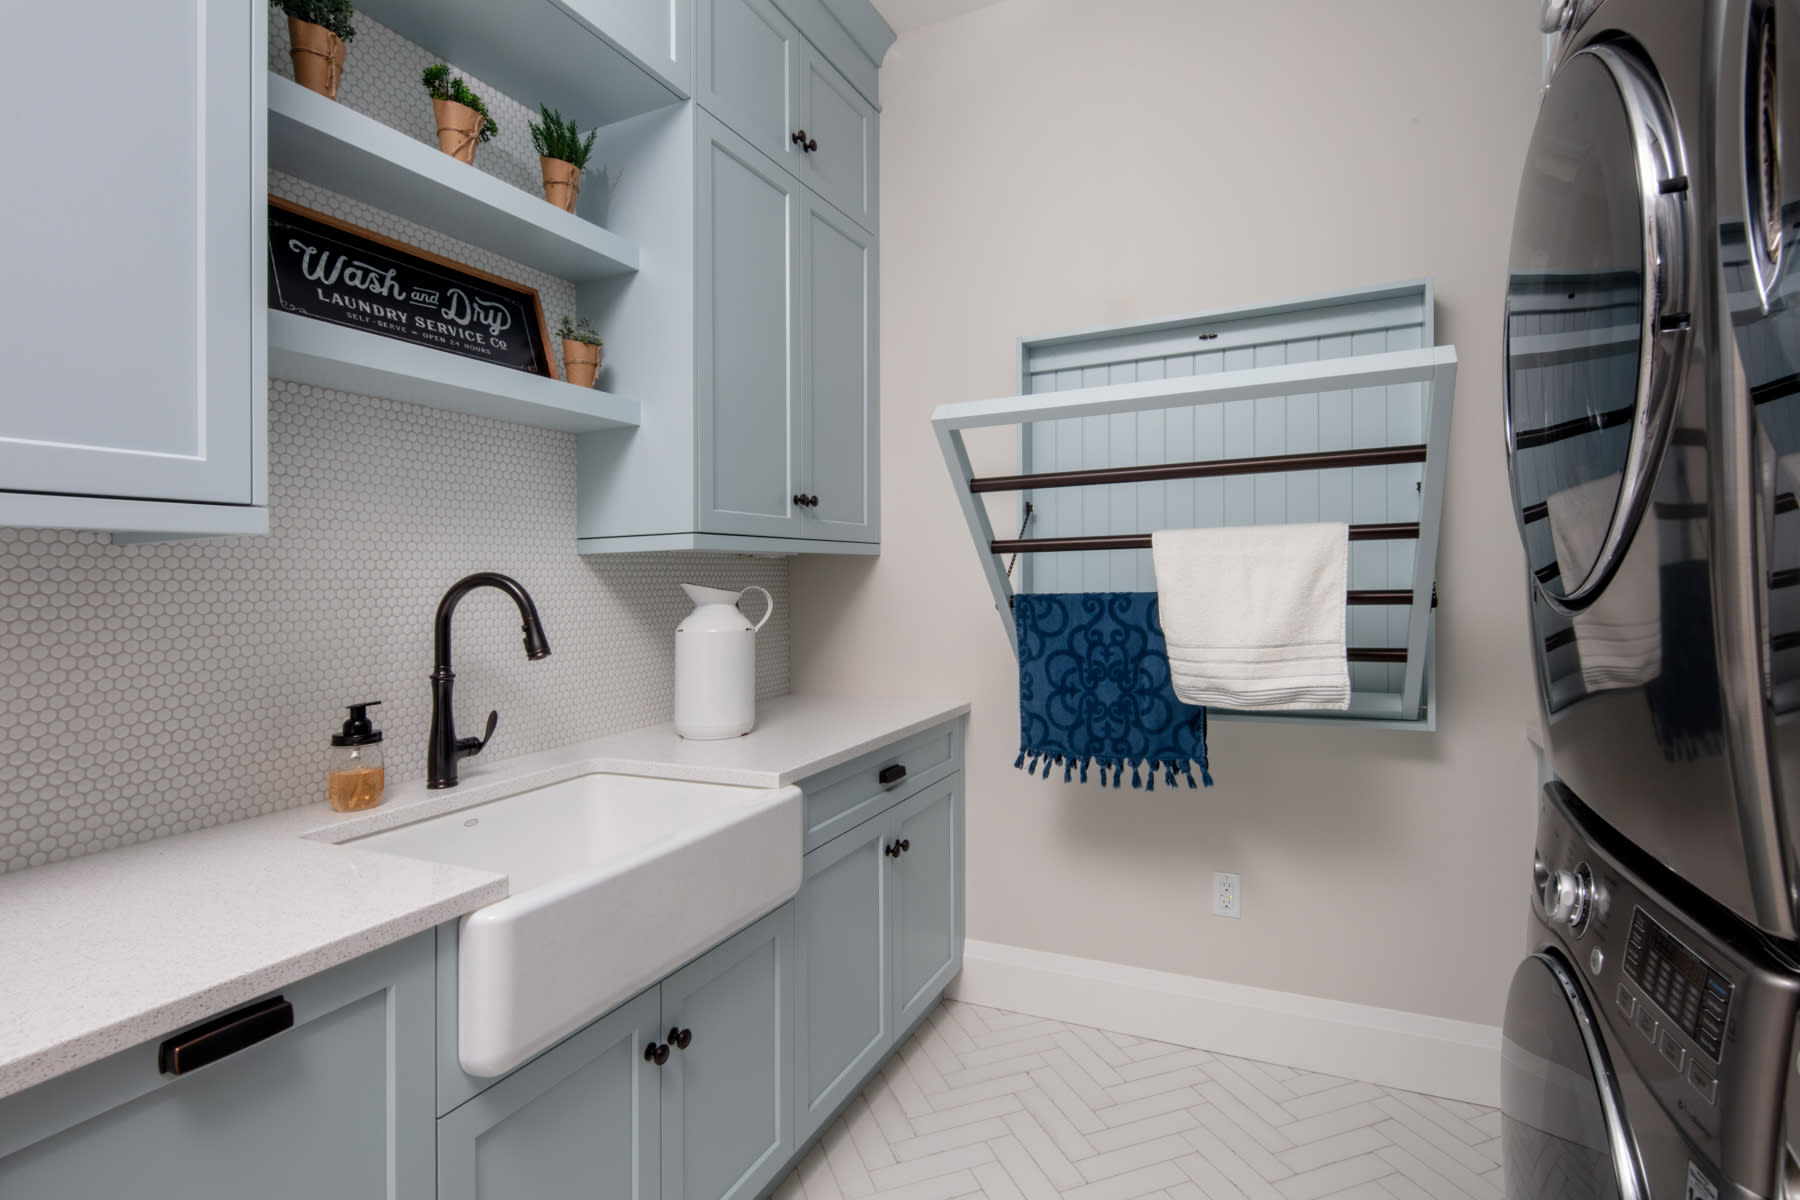 Laundry room with baby blue custom cabinets and a matching wall-mounted drying rack